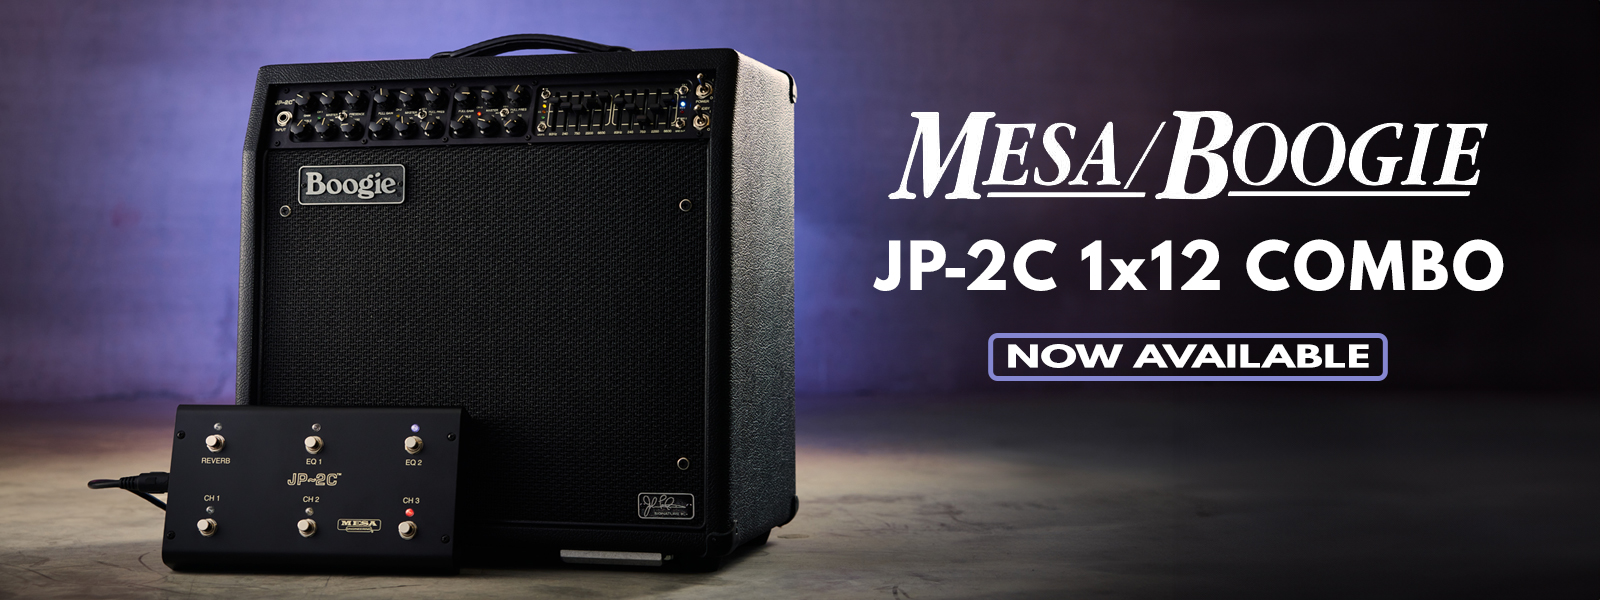 JP-2C 1x12 Combo Now Available!